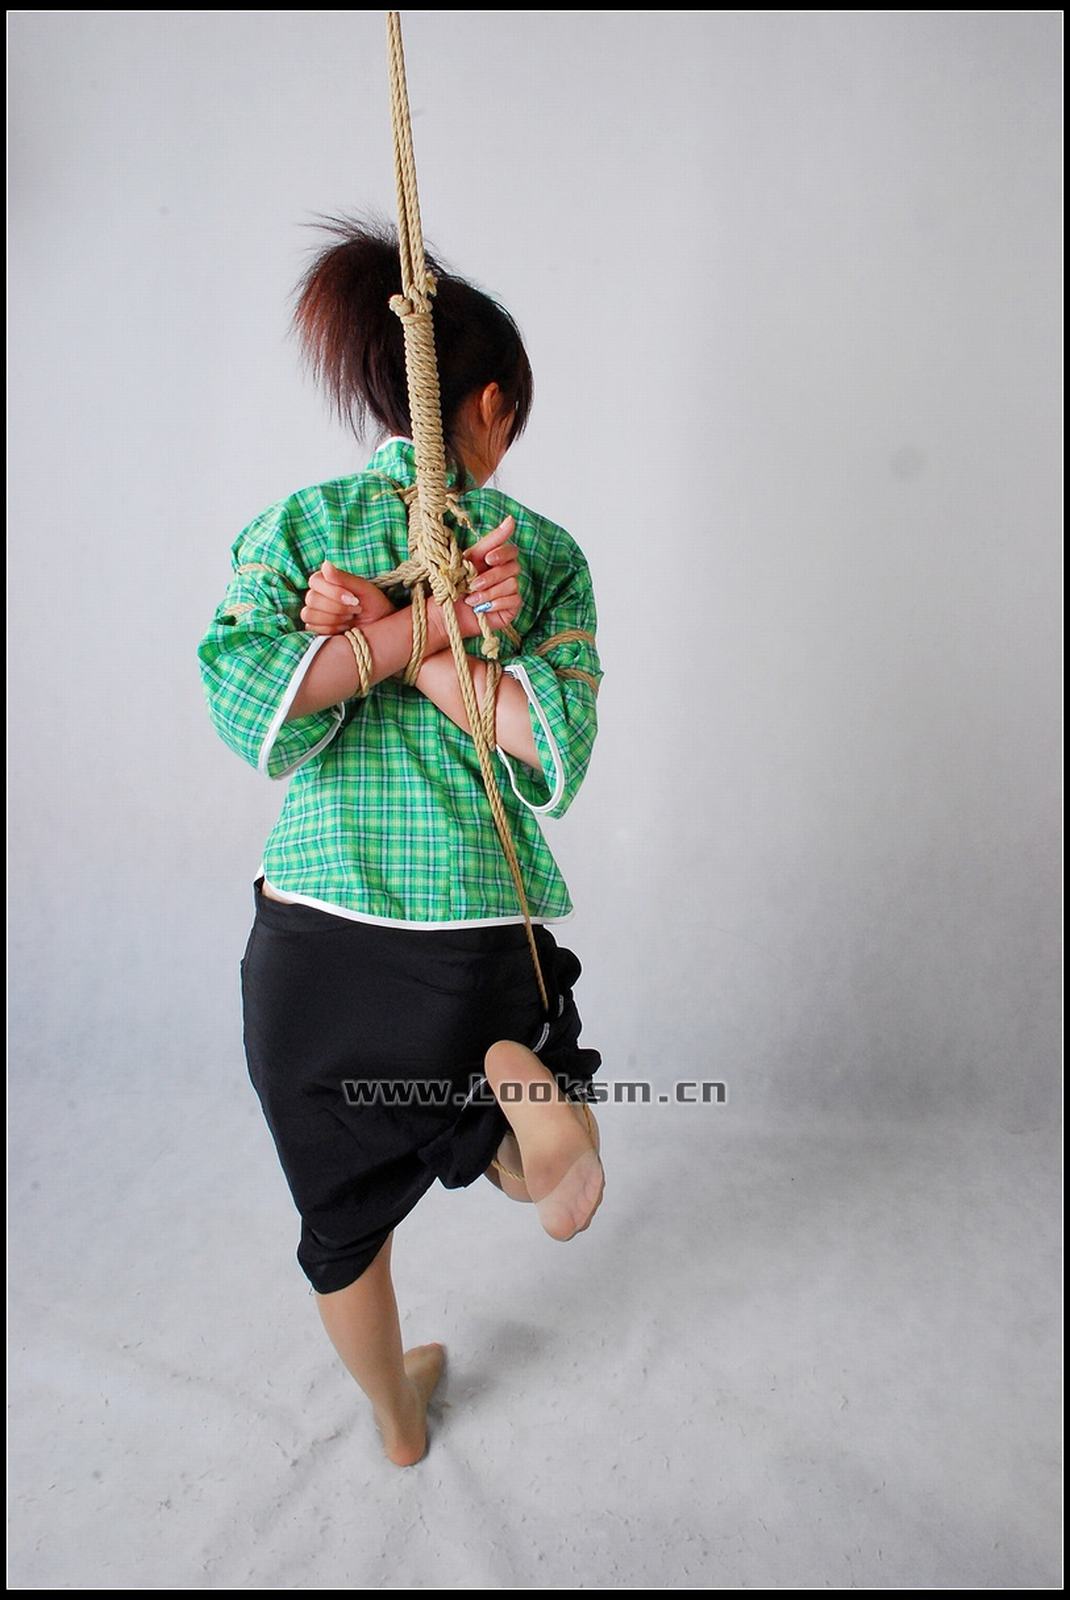 Chinese Rope Model 308